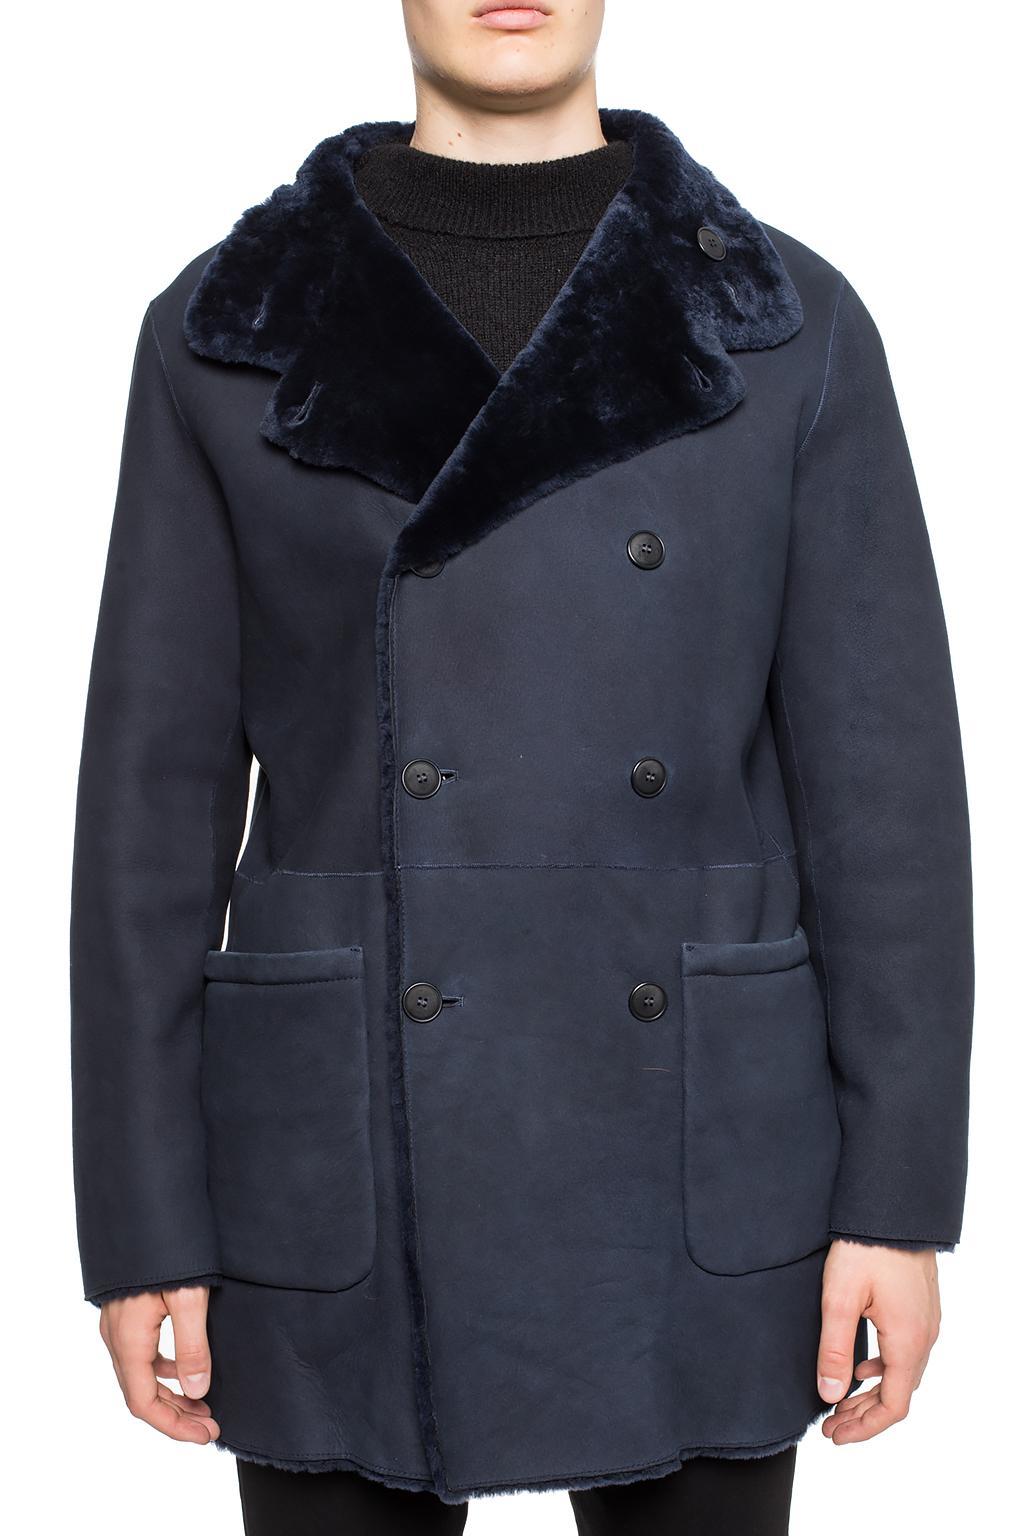 Lyst - Giorgio Armani Reversible Double-breasted Shearling Jacket in ...